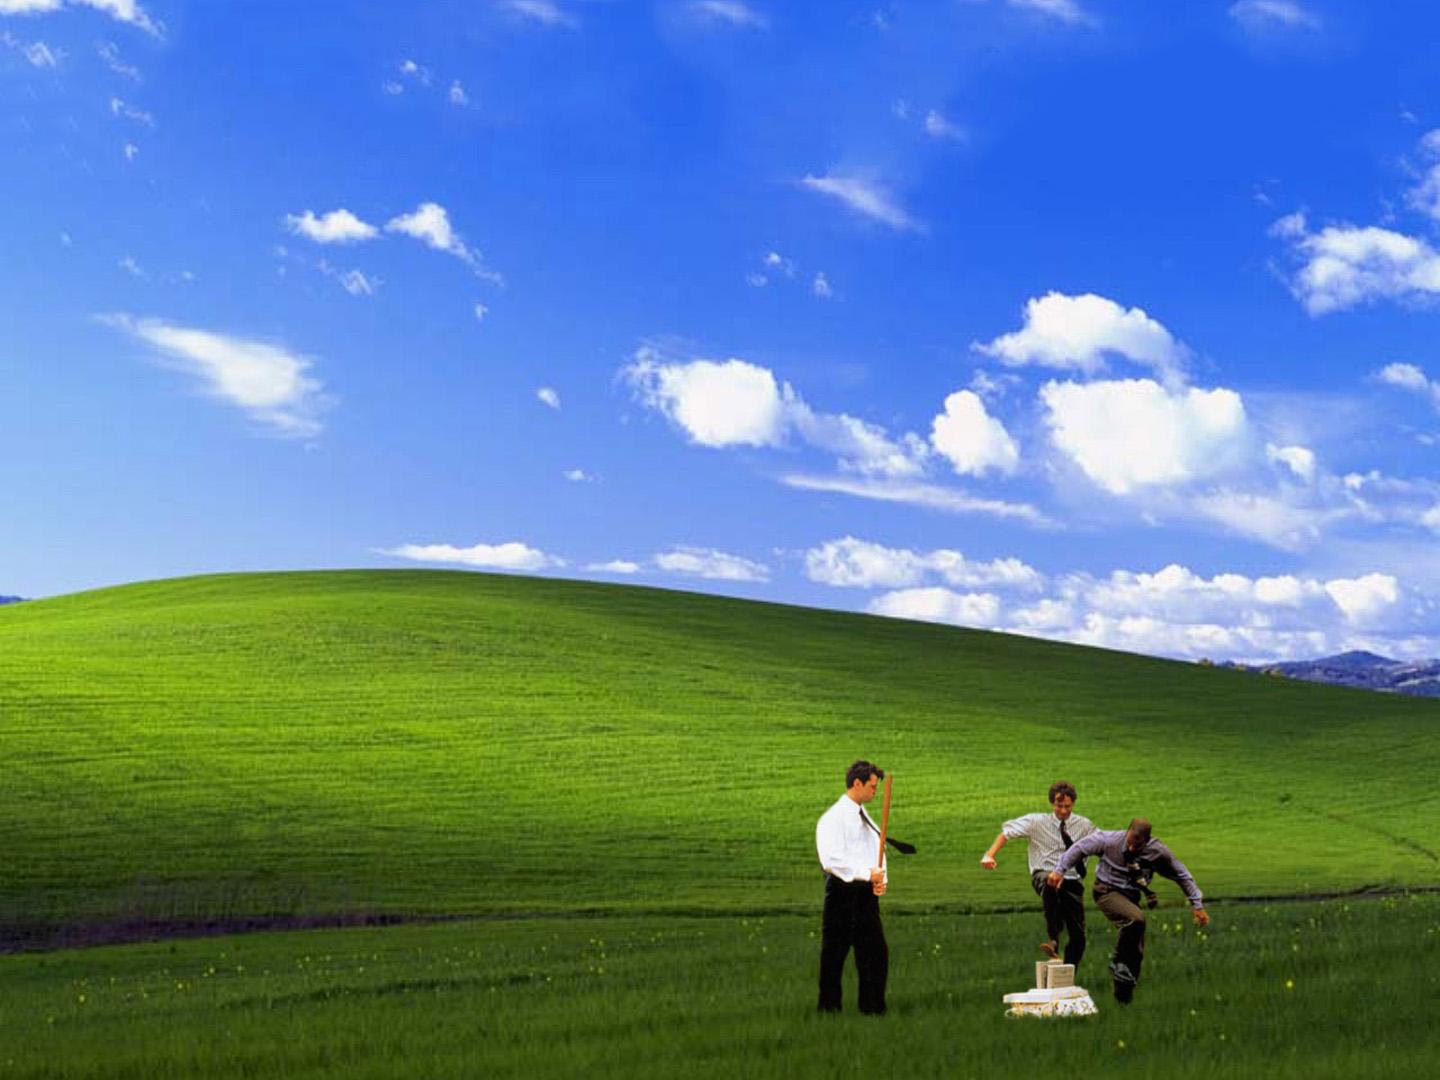 Office Space, XP Bliss style [1440x1080]